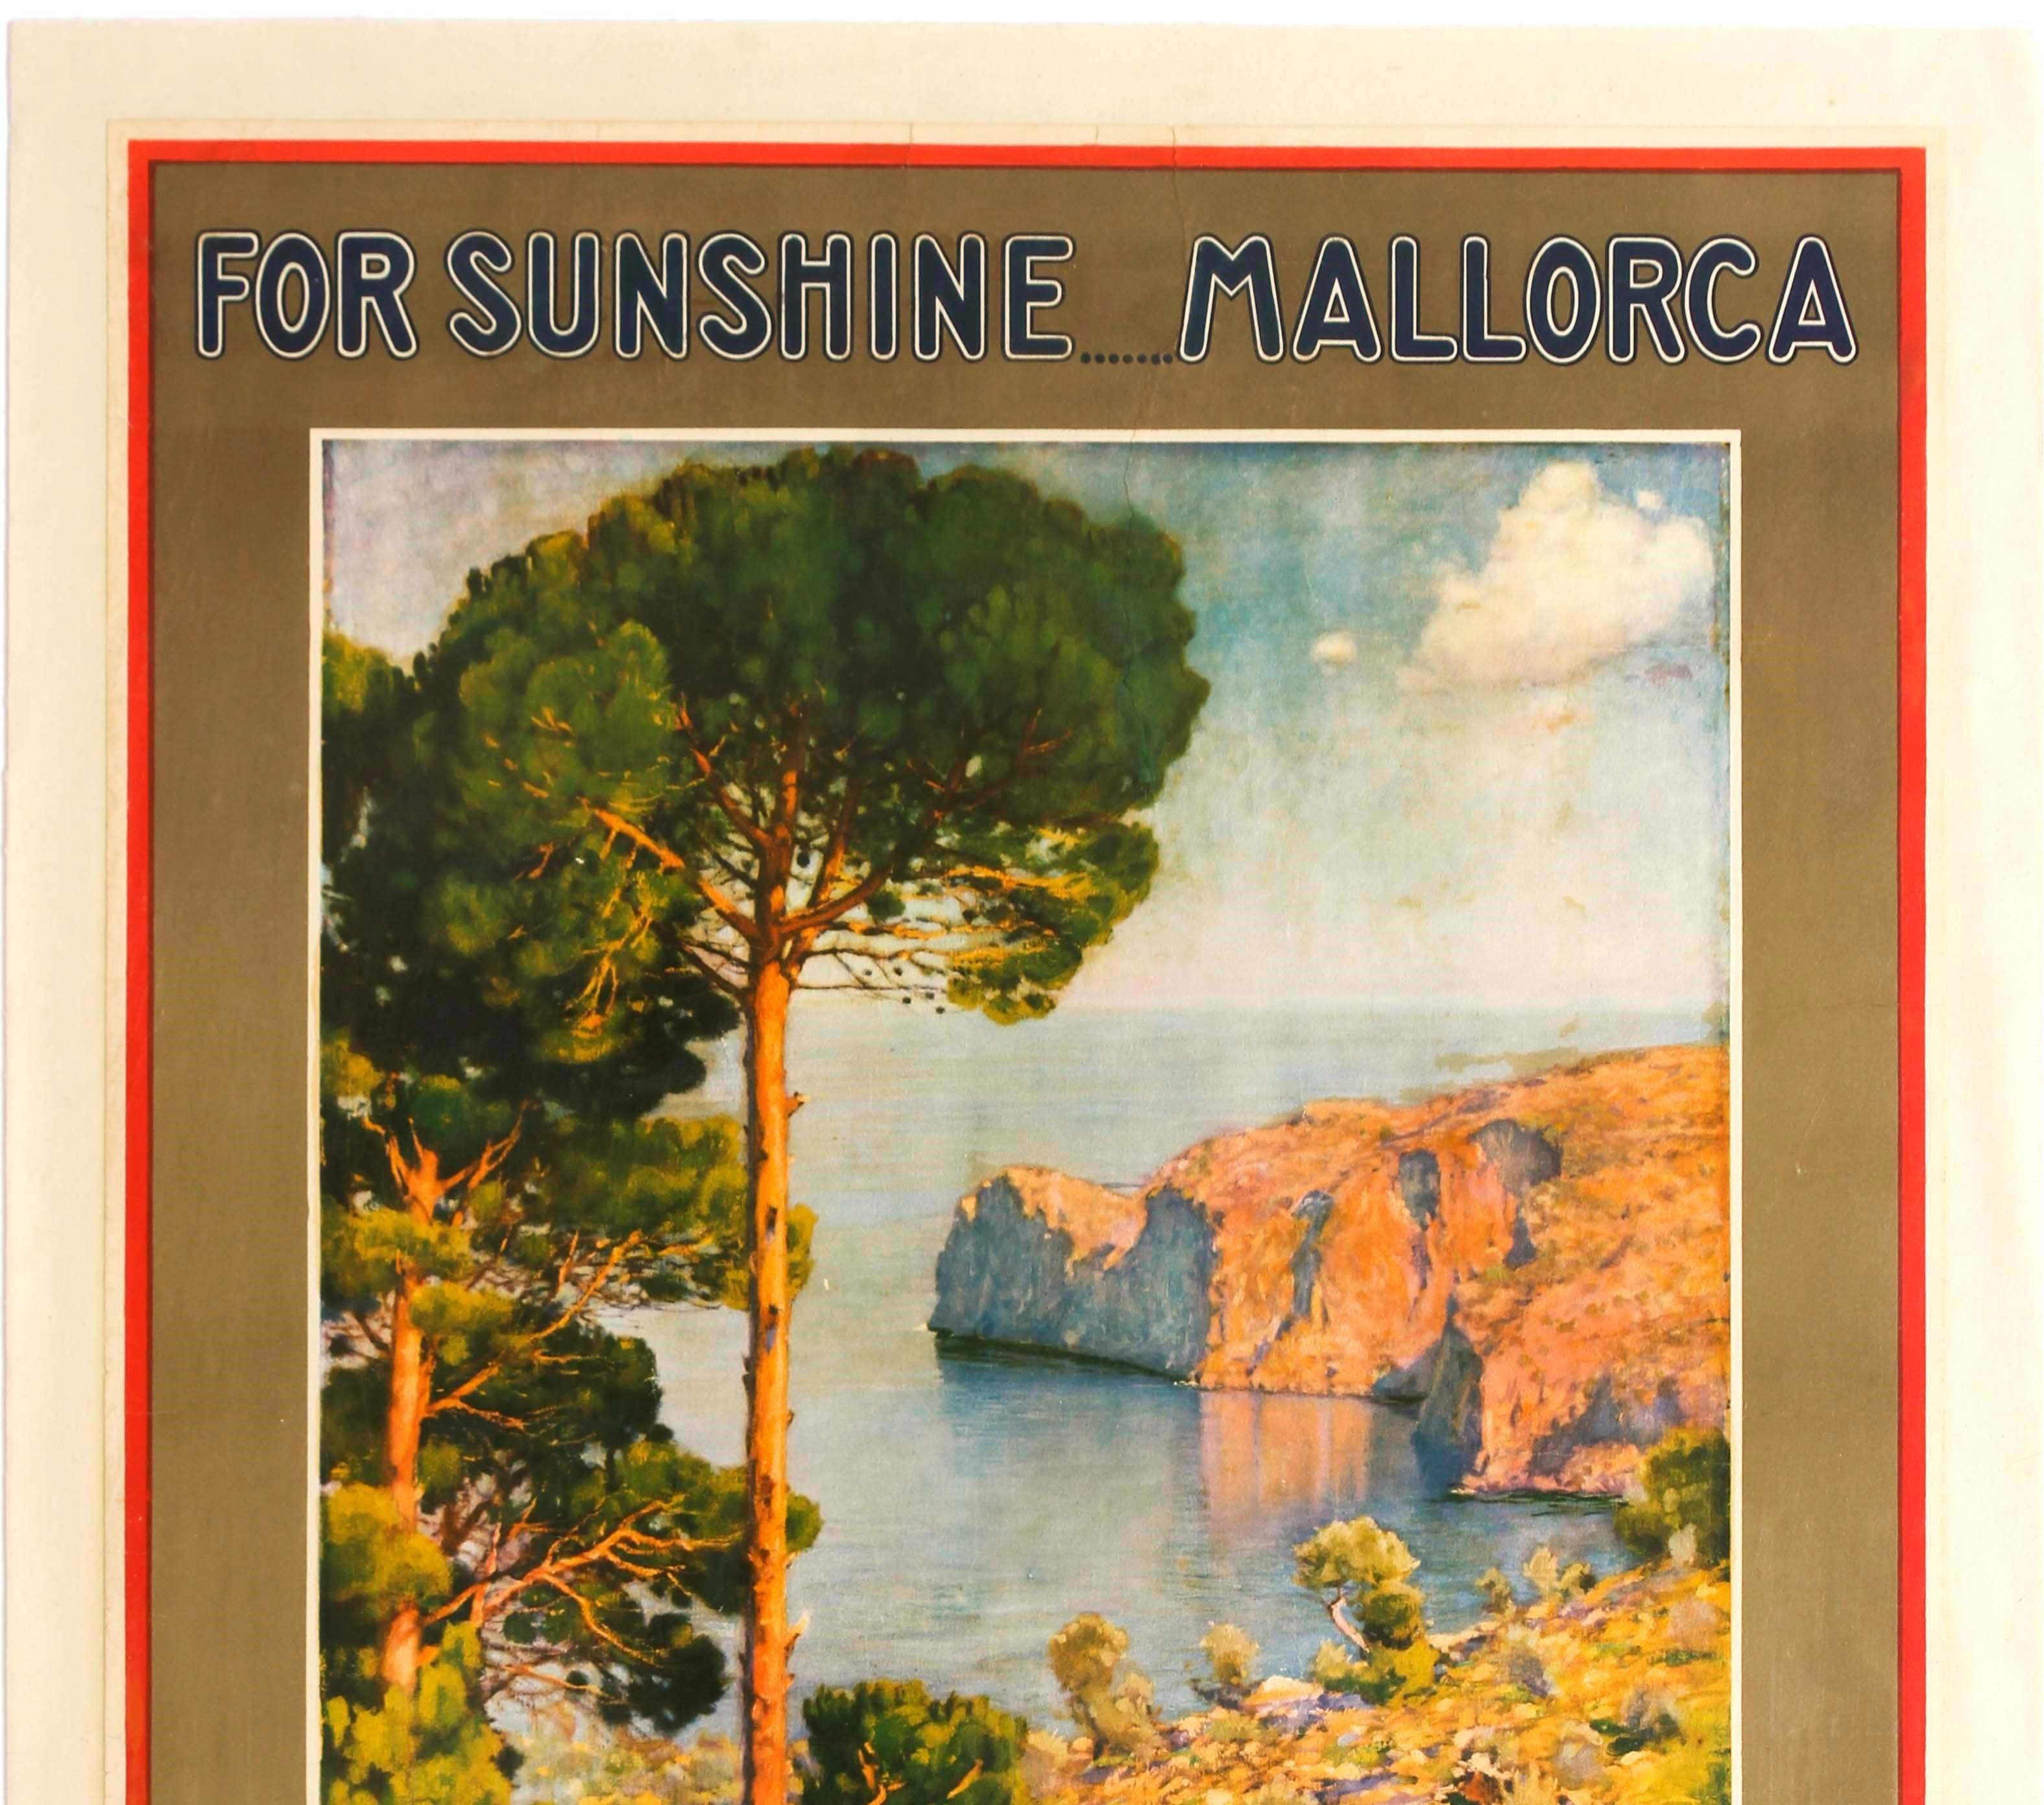 Original vintage travel poster - For Sunshine ... Mallorca - issued by Fomento Turismo de Palma featuring artwork by the Austrian painter Erwin Hubert (1883-1963) depicting a view of the Spanish island landscape along the rocky coastline with the